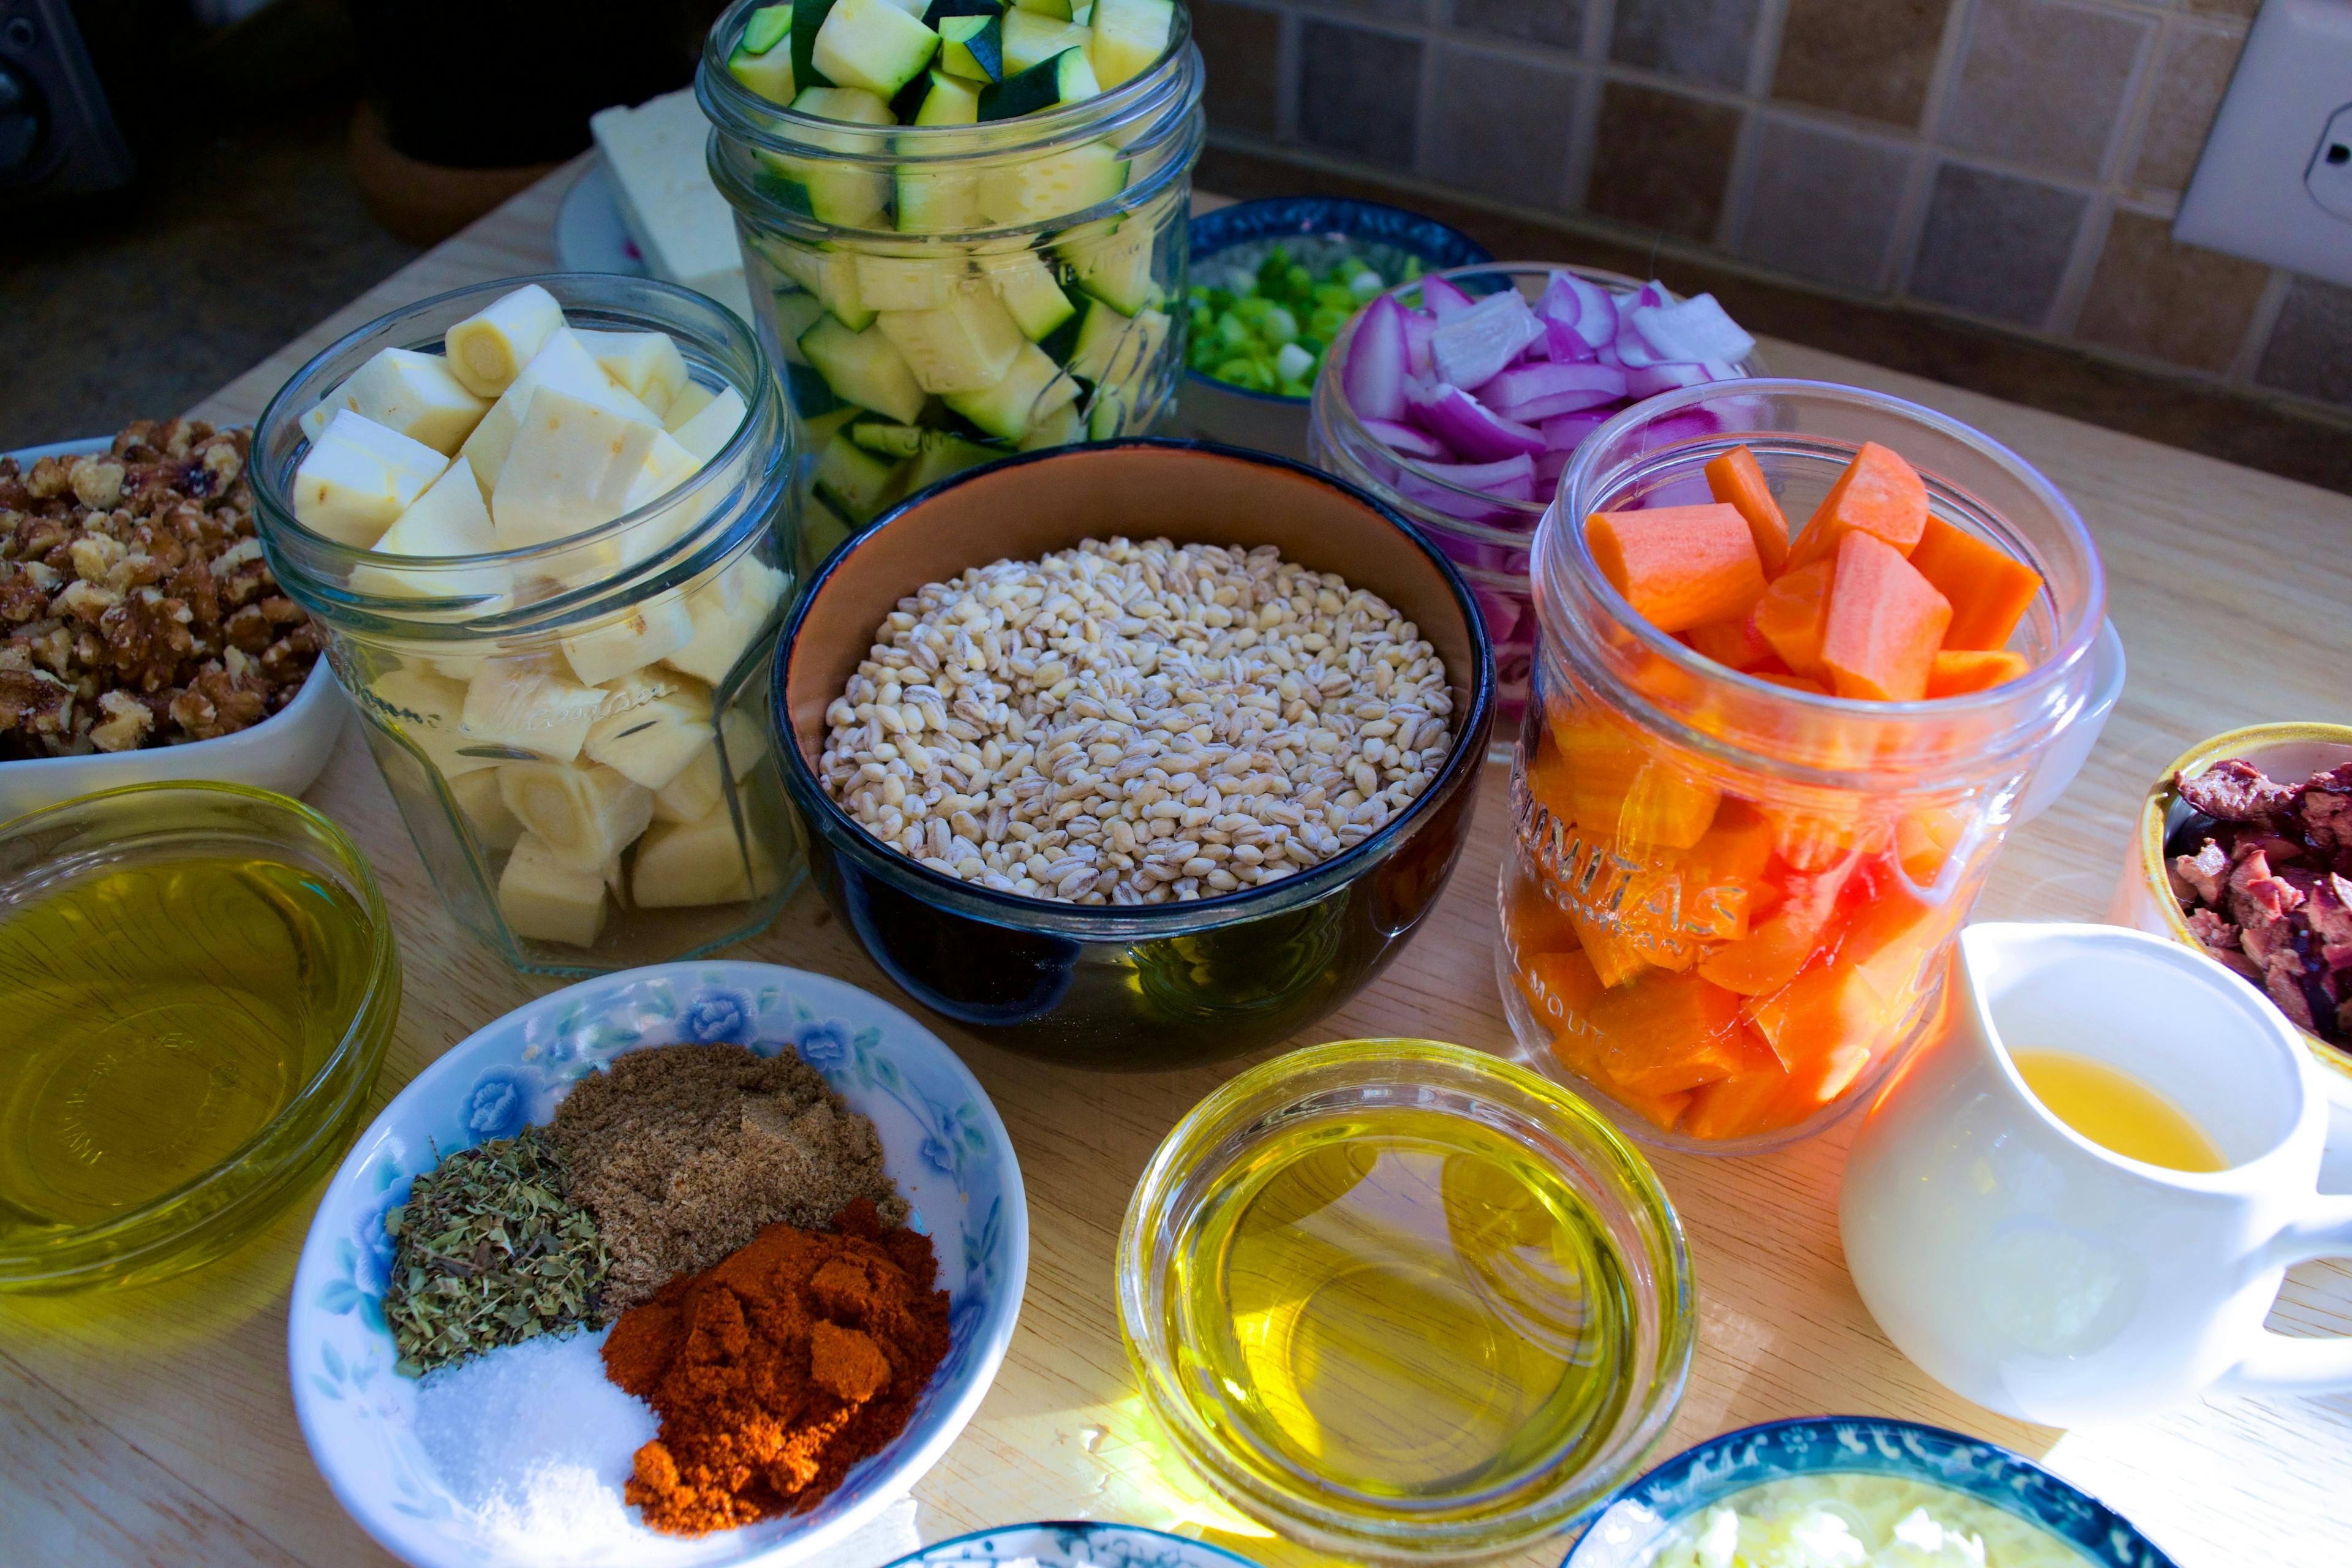 Ingredients in jars and dishes- zucchini, parsnips, red onion, walnuts, dried barley, spices, carrots, olive oil, and olives are all visible.